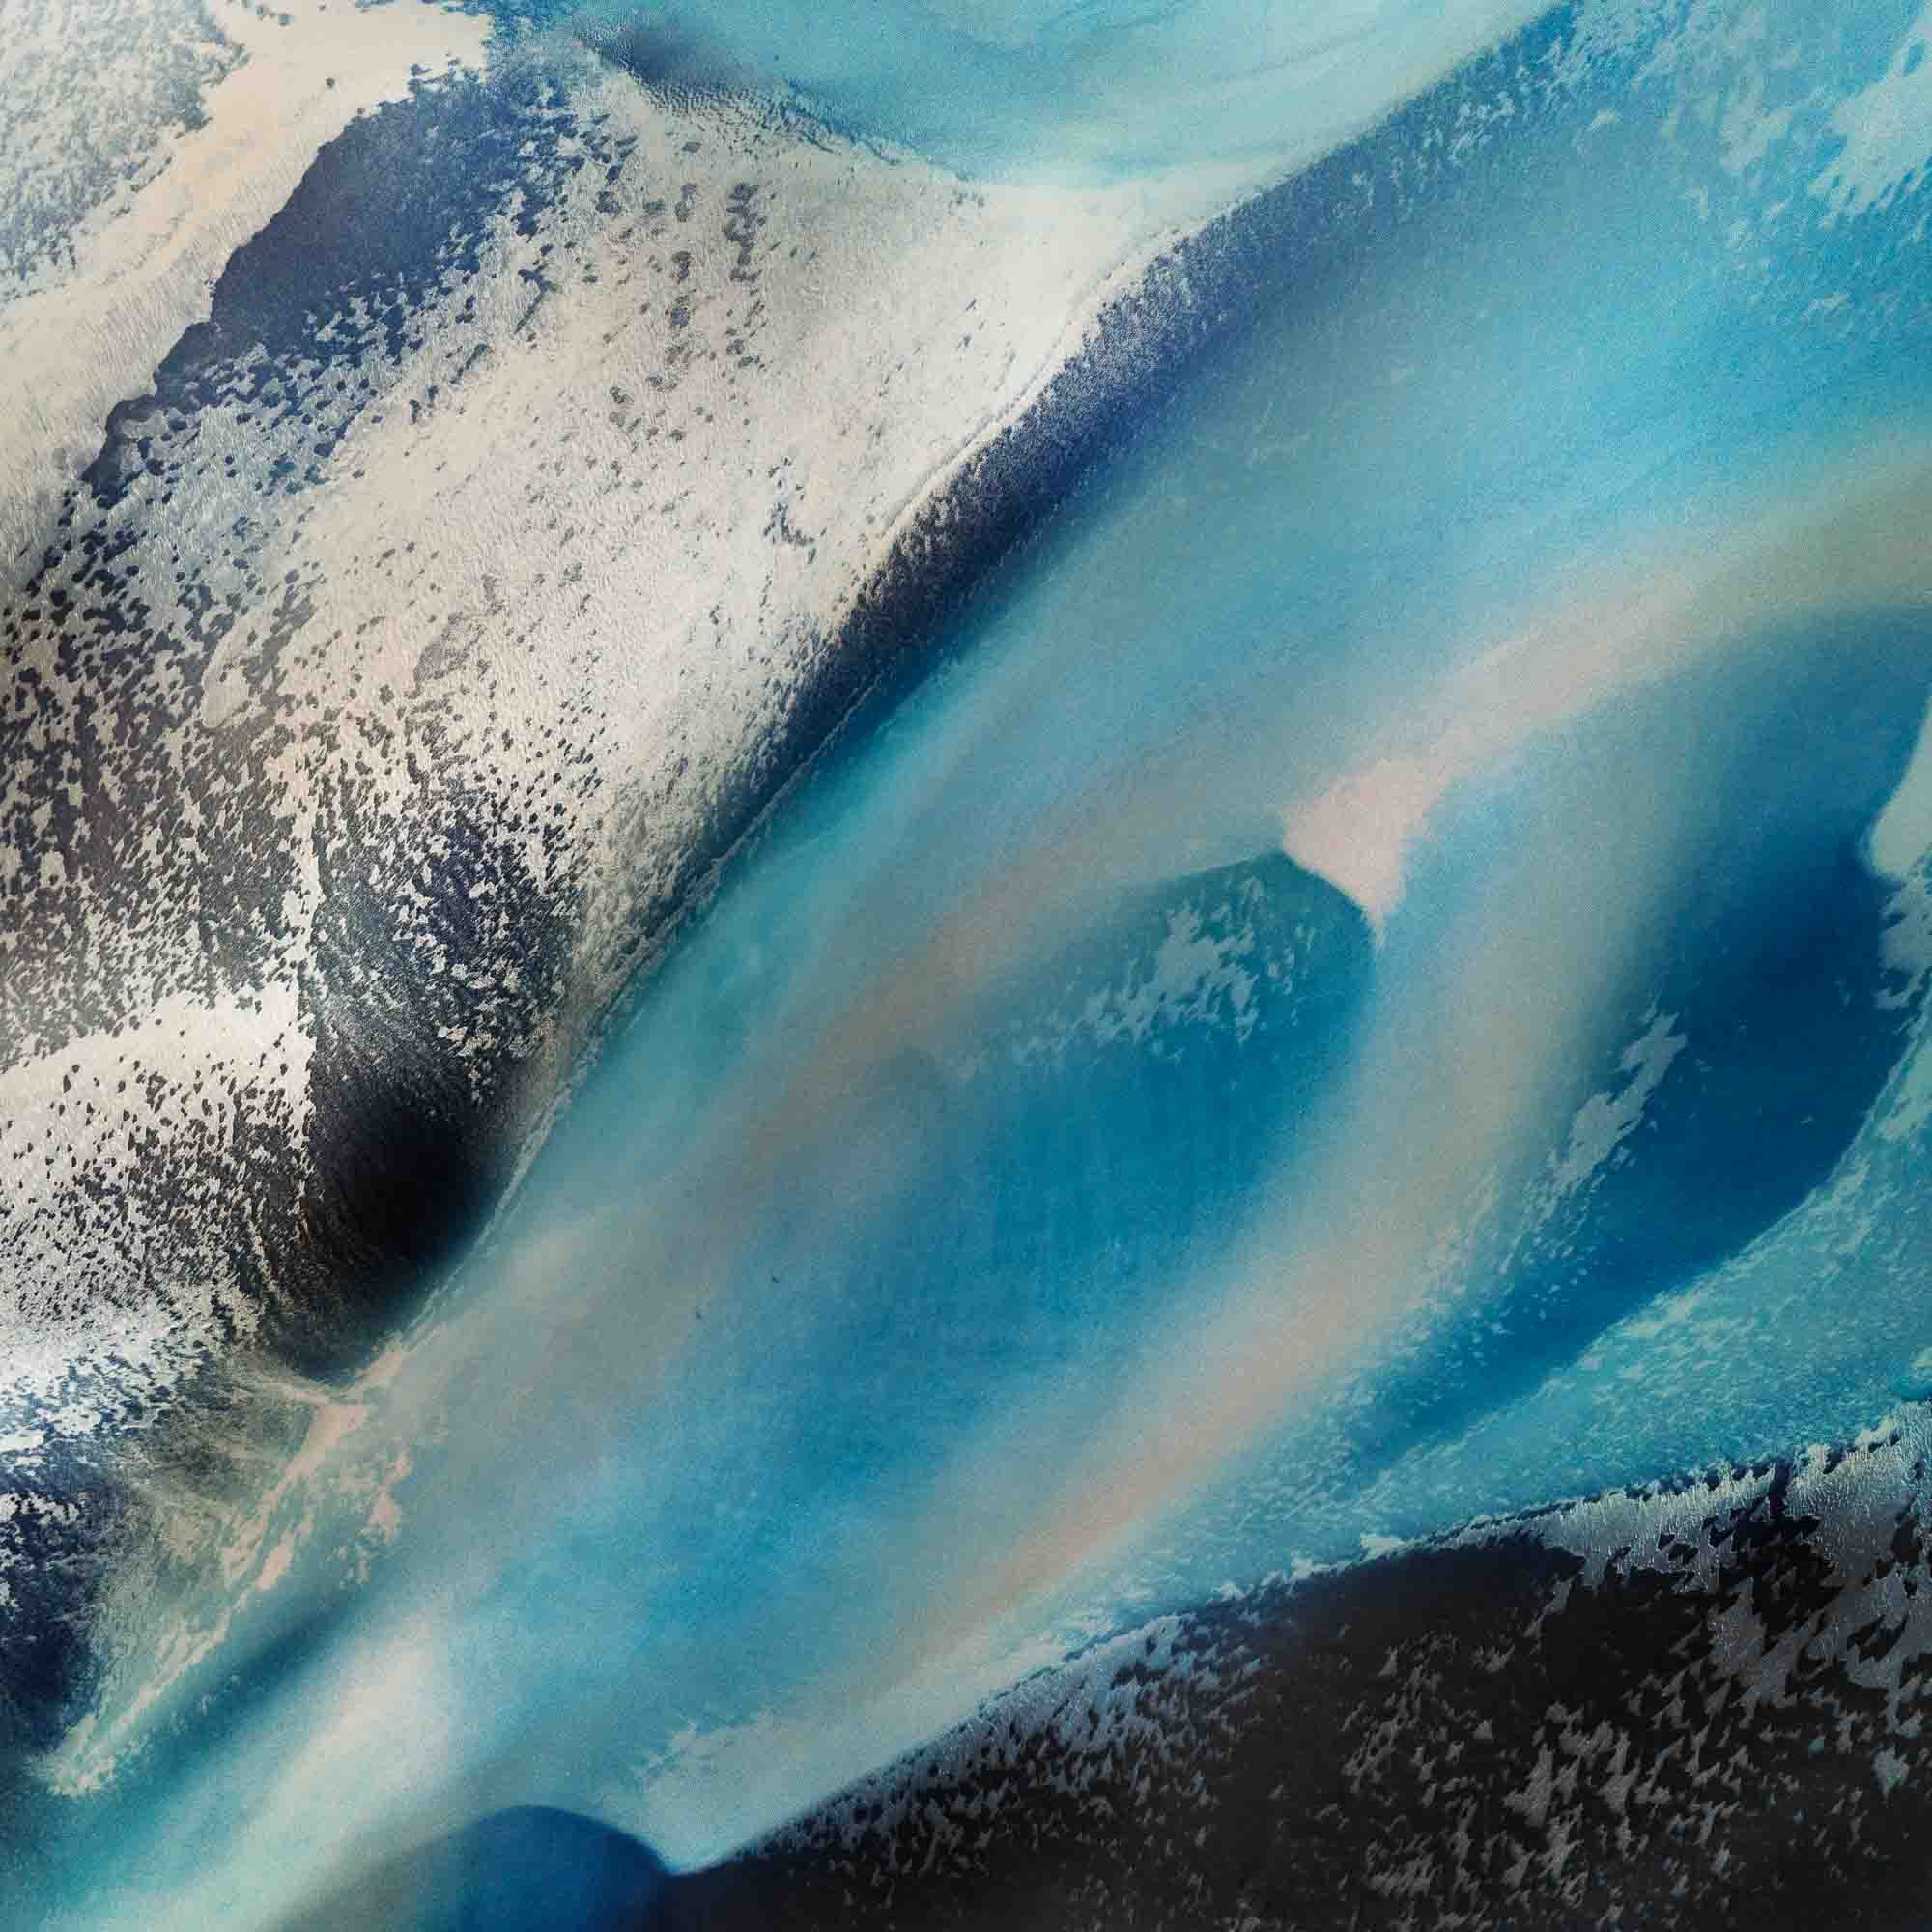 Overhead shot of contrasting blue glacial streams and ashy mountain terrain in an abstract Icelandic landscape.